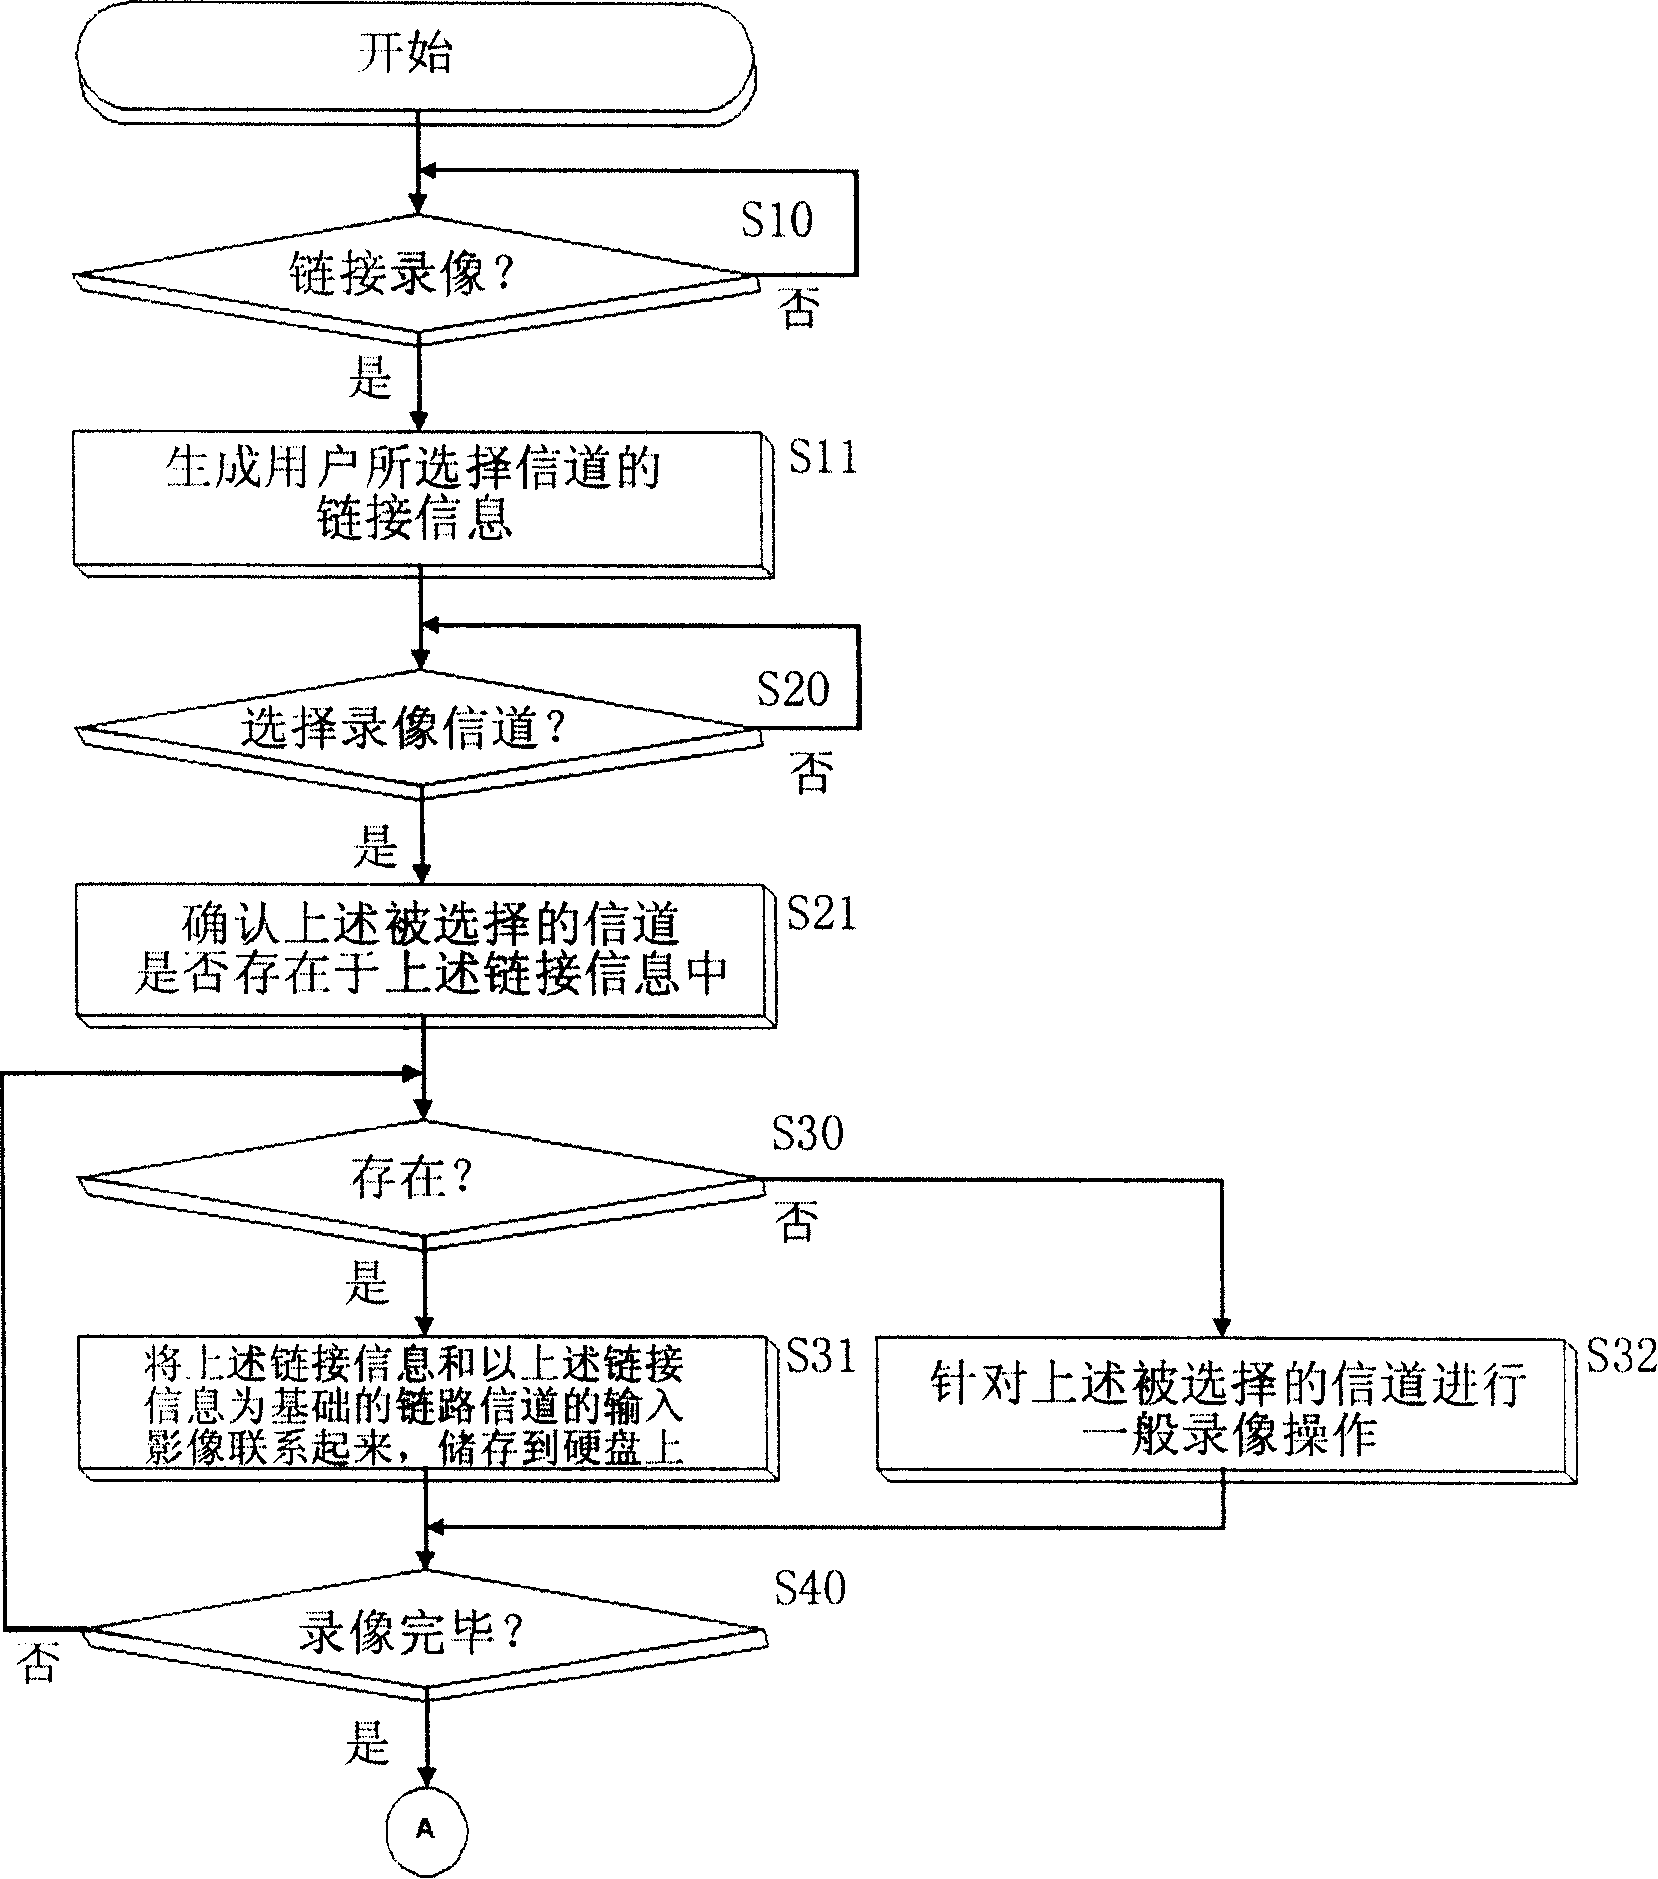 Playing control method for digital video tape recorder